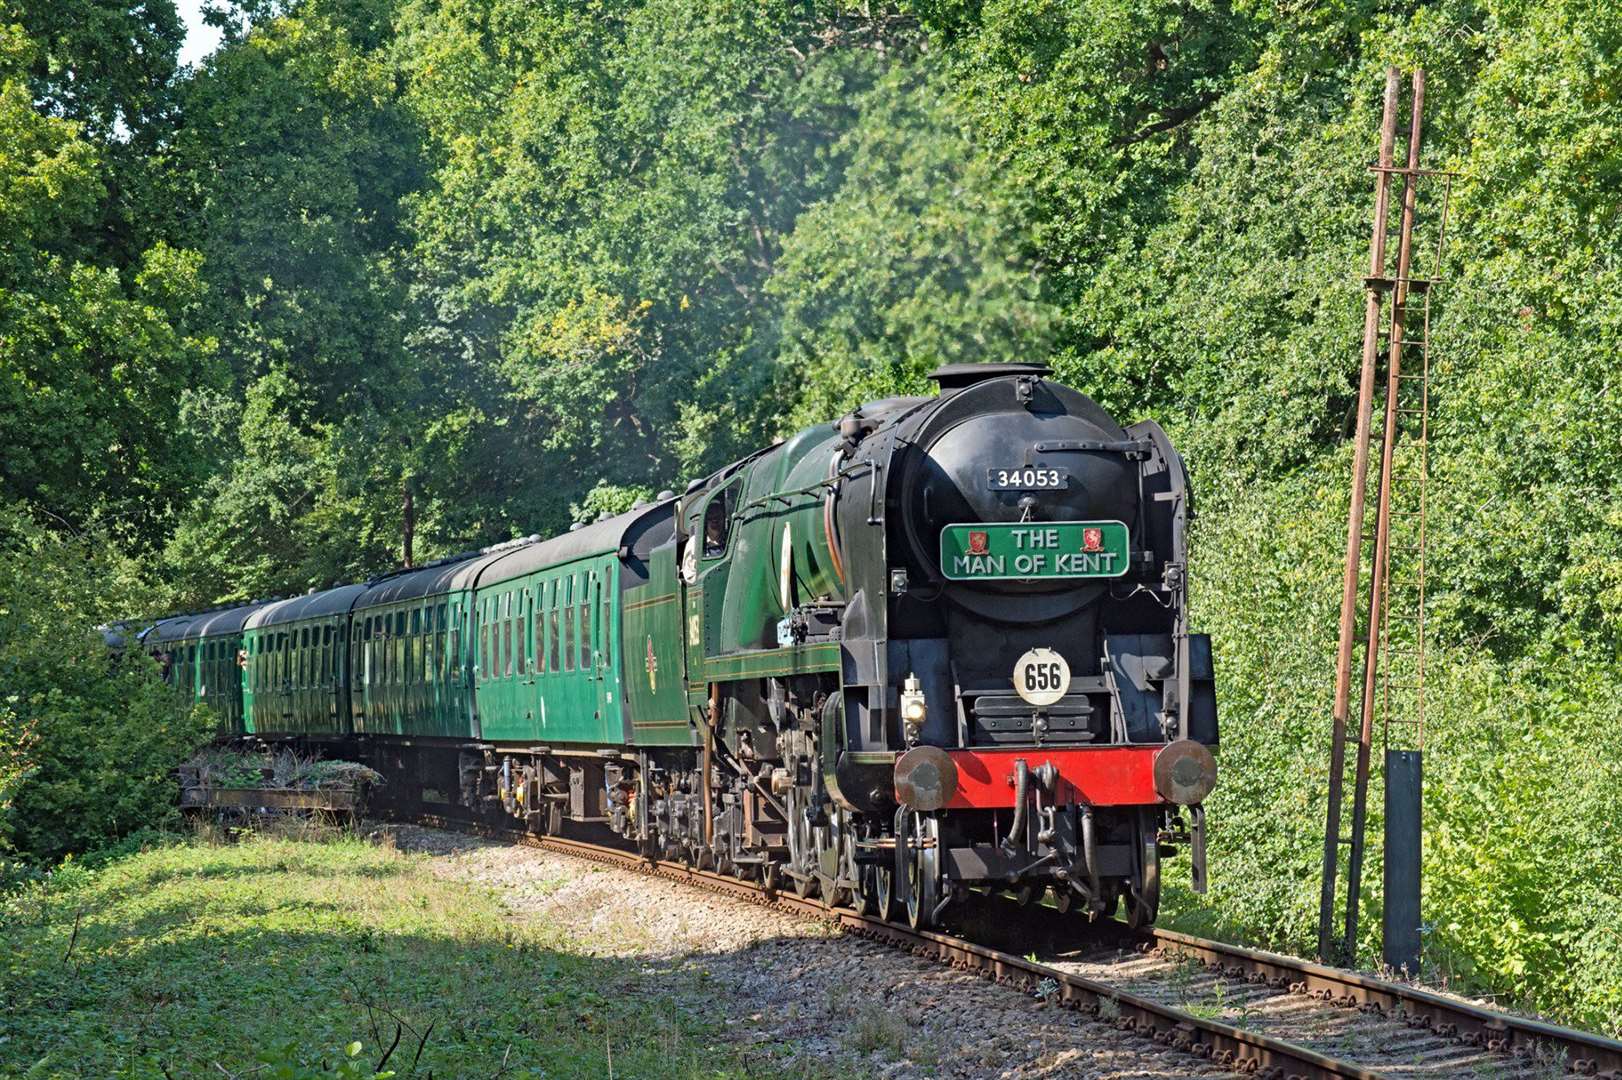 The Bulleid Pacific at the Spa Valley Railway